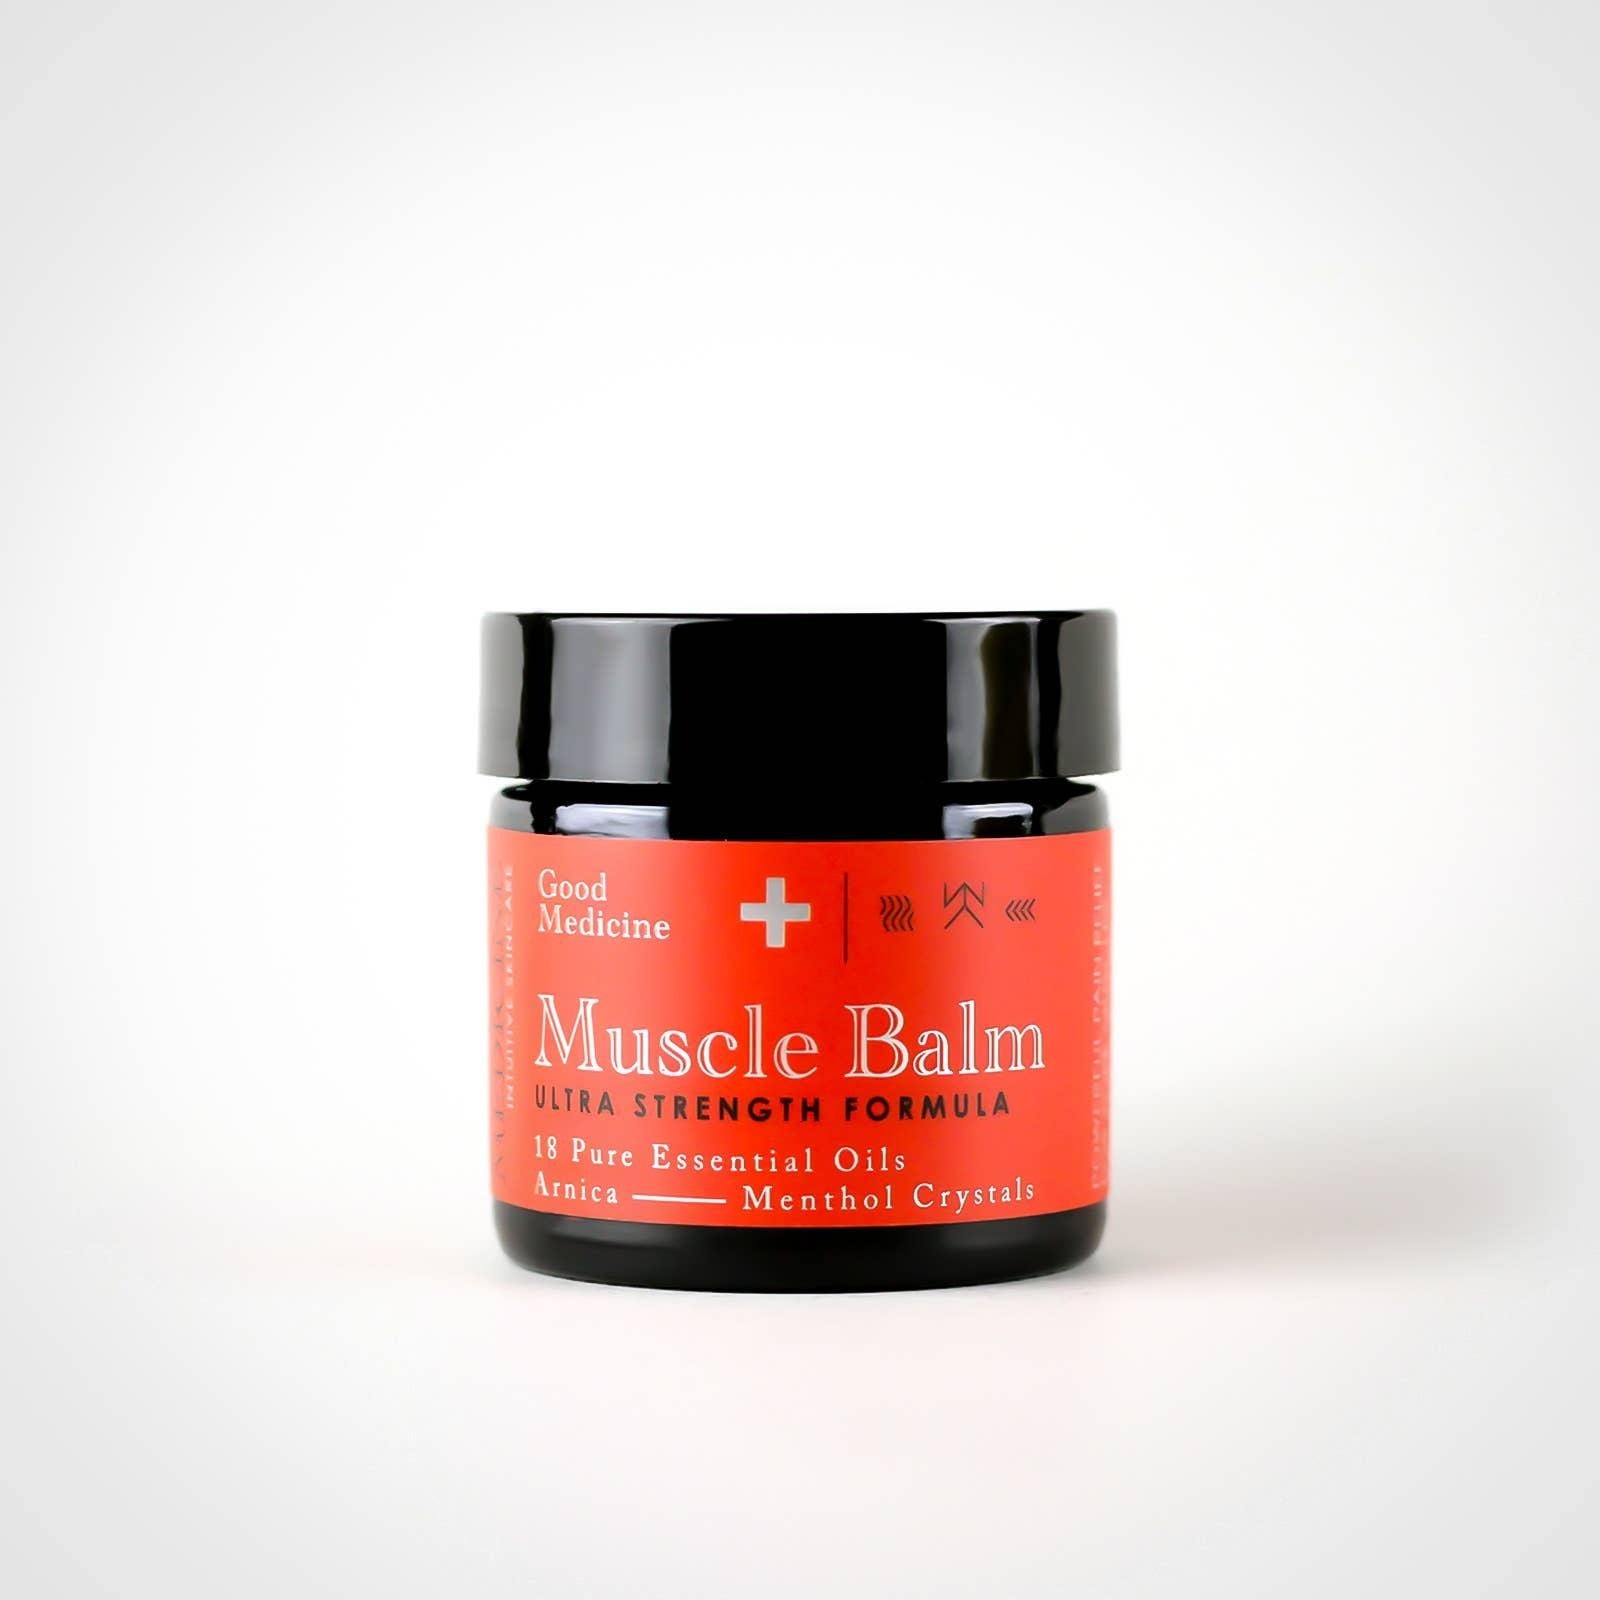 Good Beauty Medicine Lab Muscle Relief Balm - 4oz